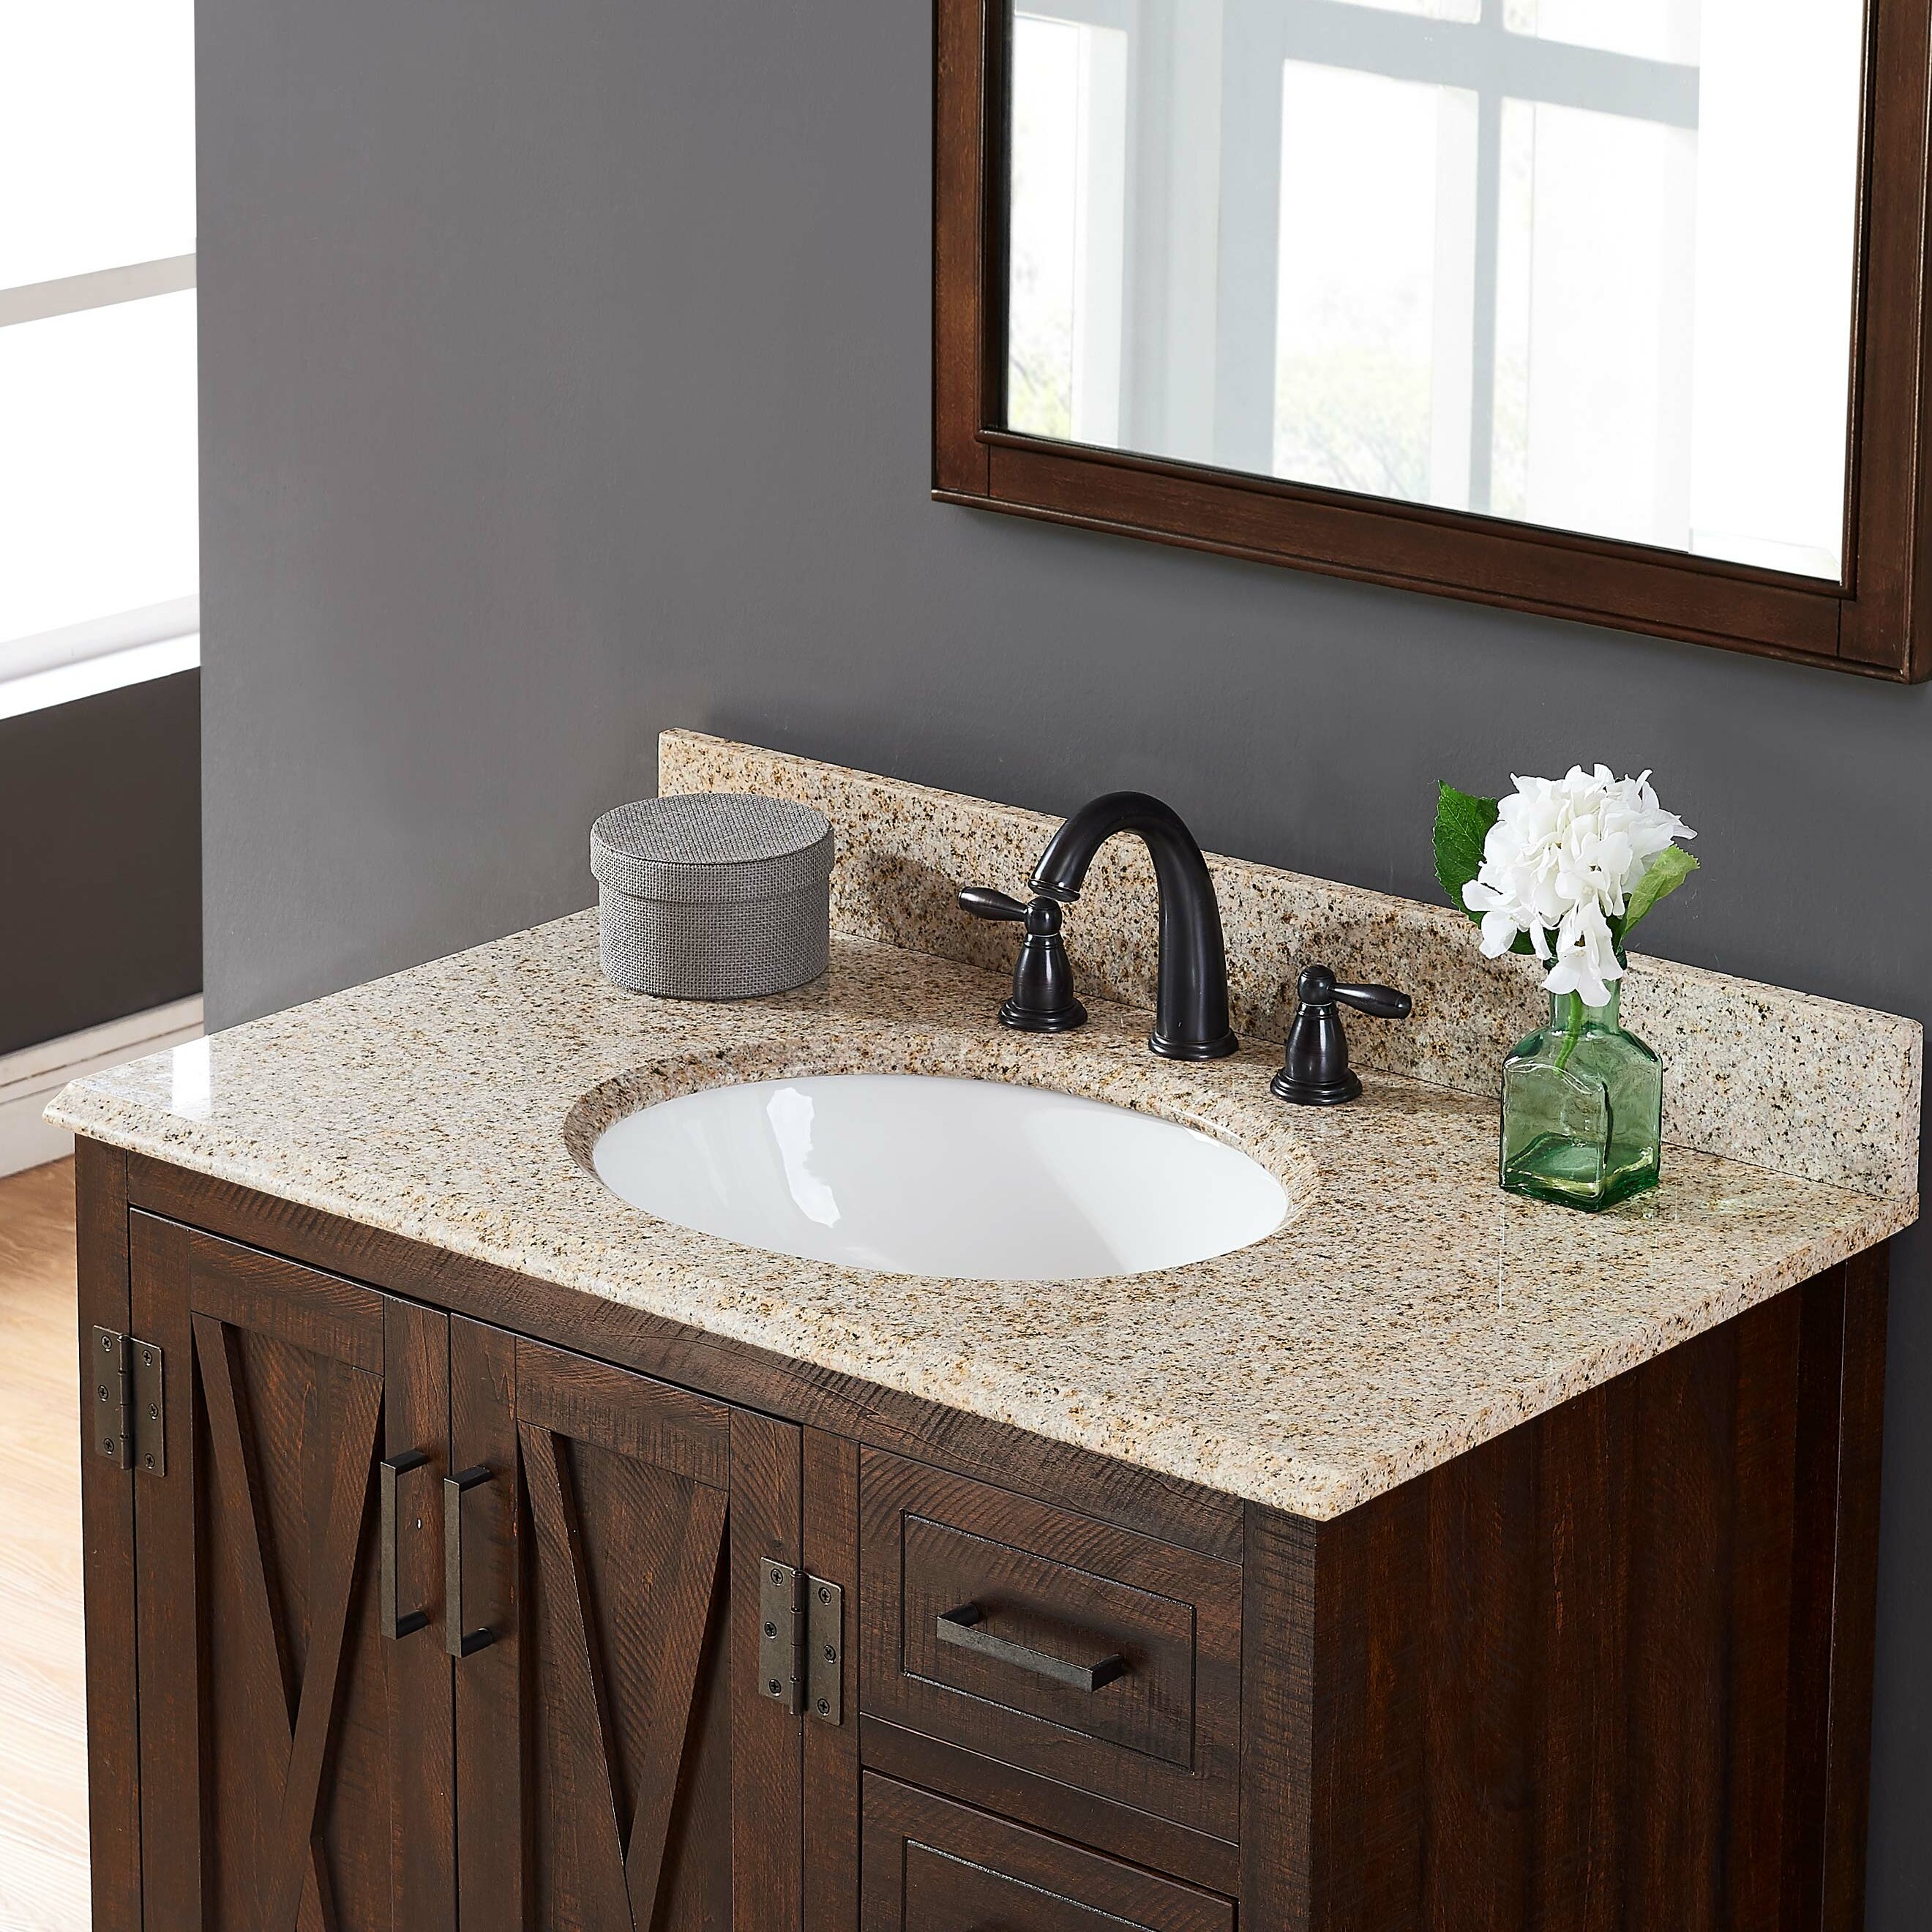 Tile & Top 31'' Granite Single with Sink and 3 Faucet Holes & Reviews | Wayfair